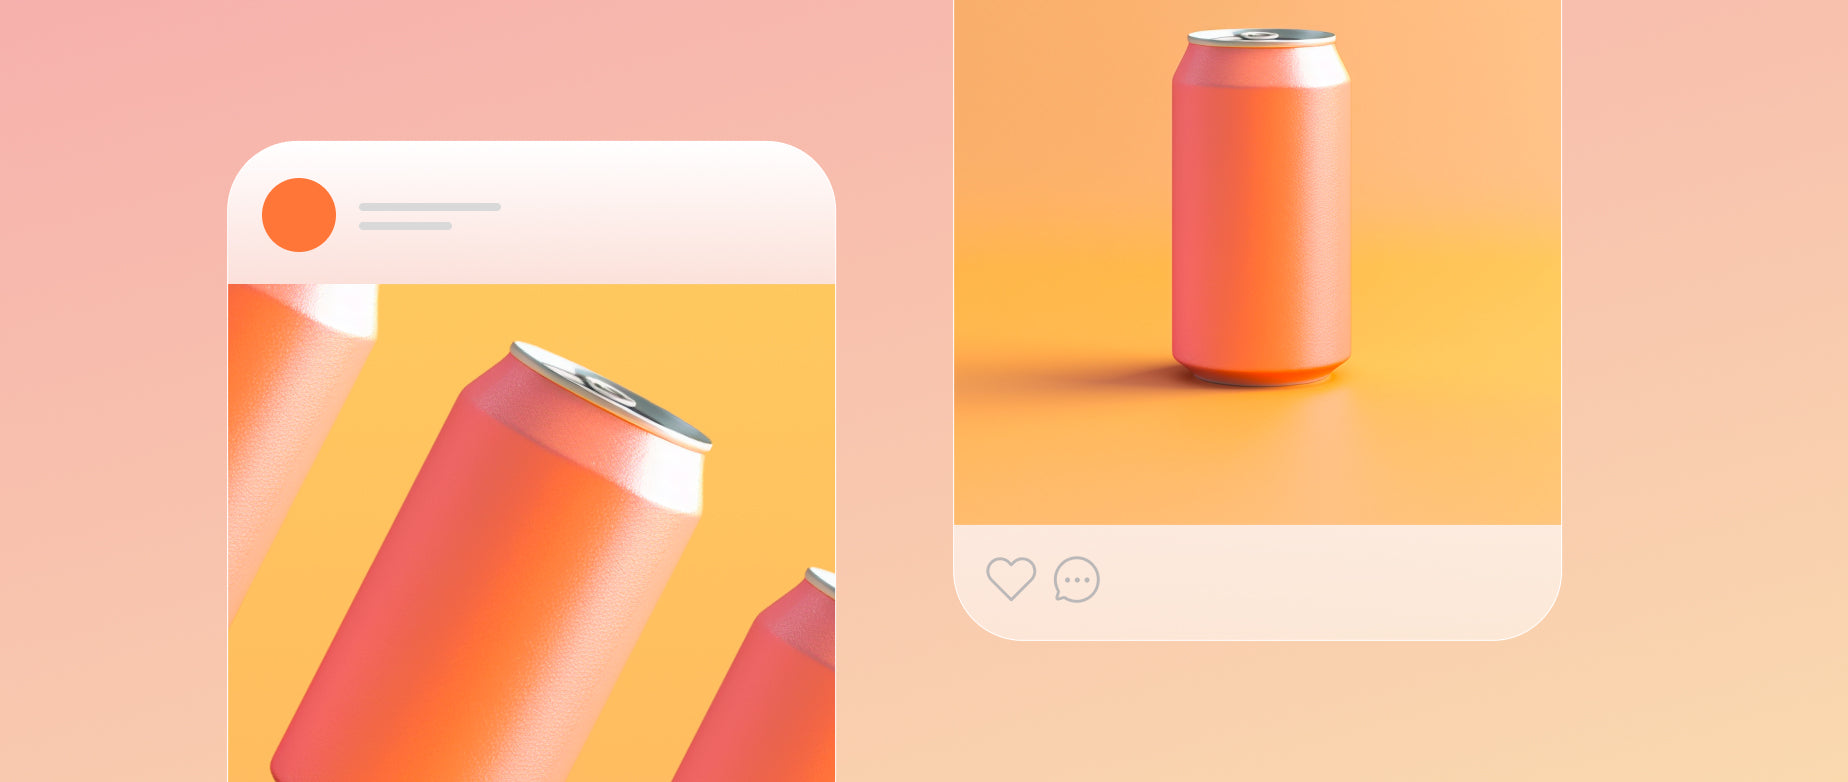 screenshots of instagram posts with a soda can as the image: aesthetic instagram